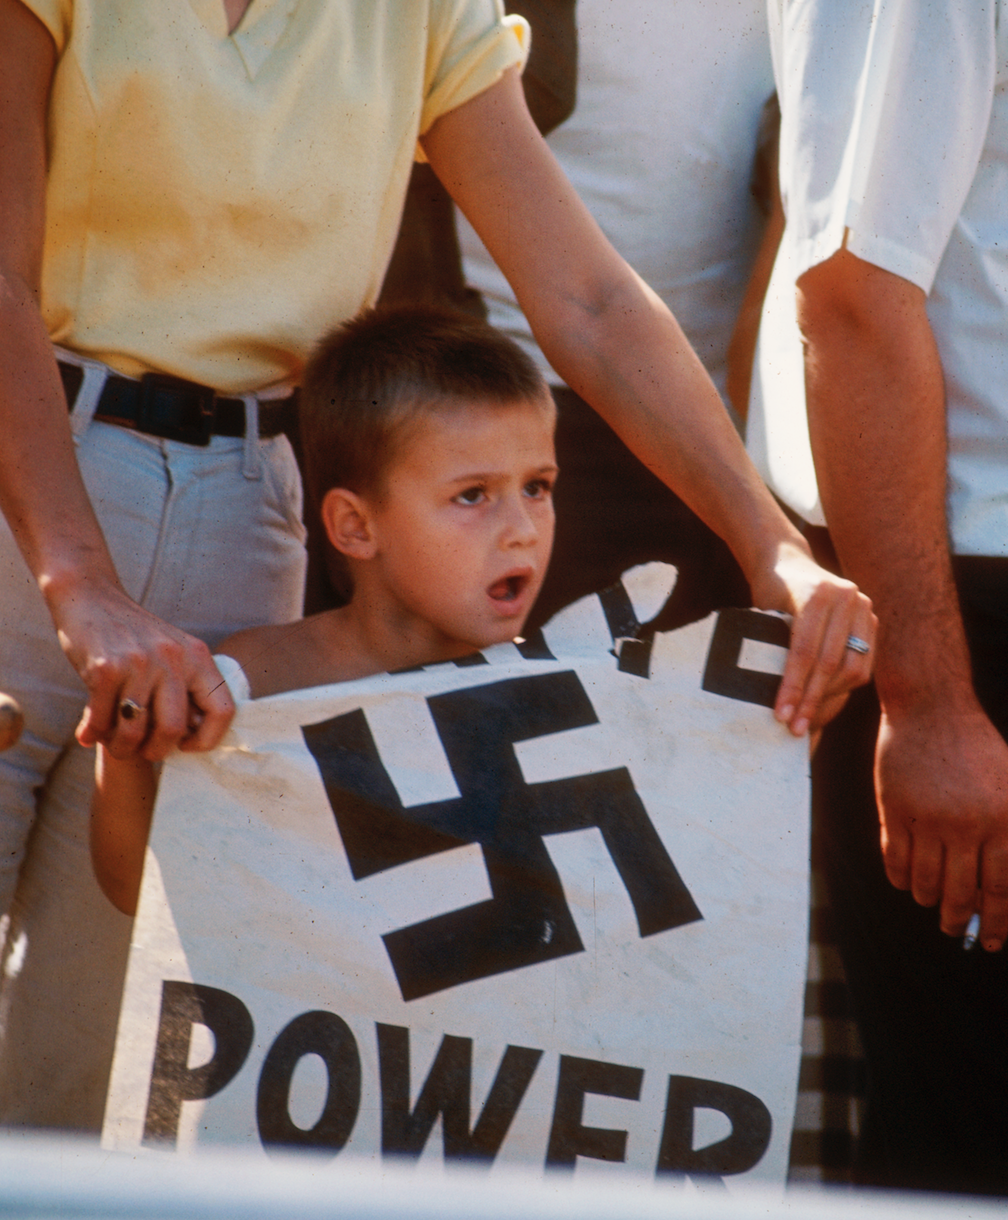 A young boy holds up a “White Power” sign at a counter-demonstration of a civil rights march in 1966. (Courtesy Chicago History Museum, ICHi-036901; Declan Haun, photographer)